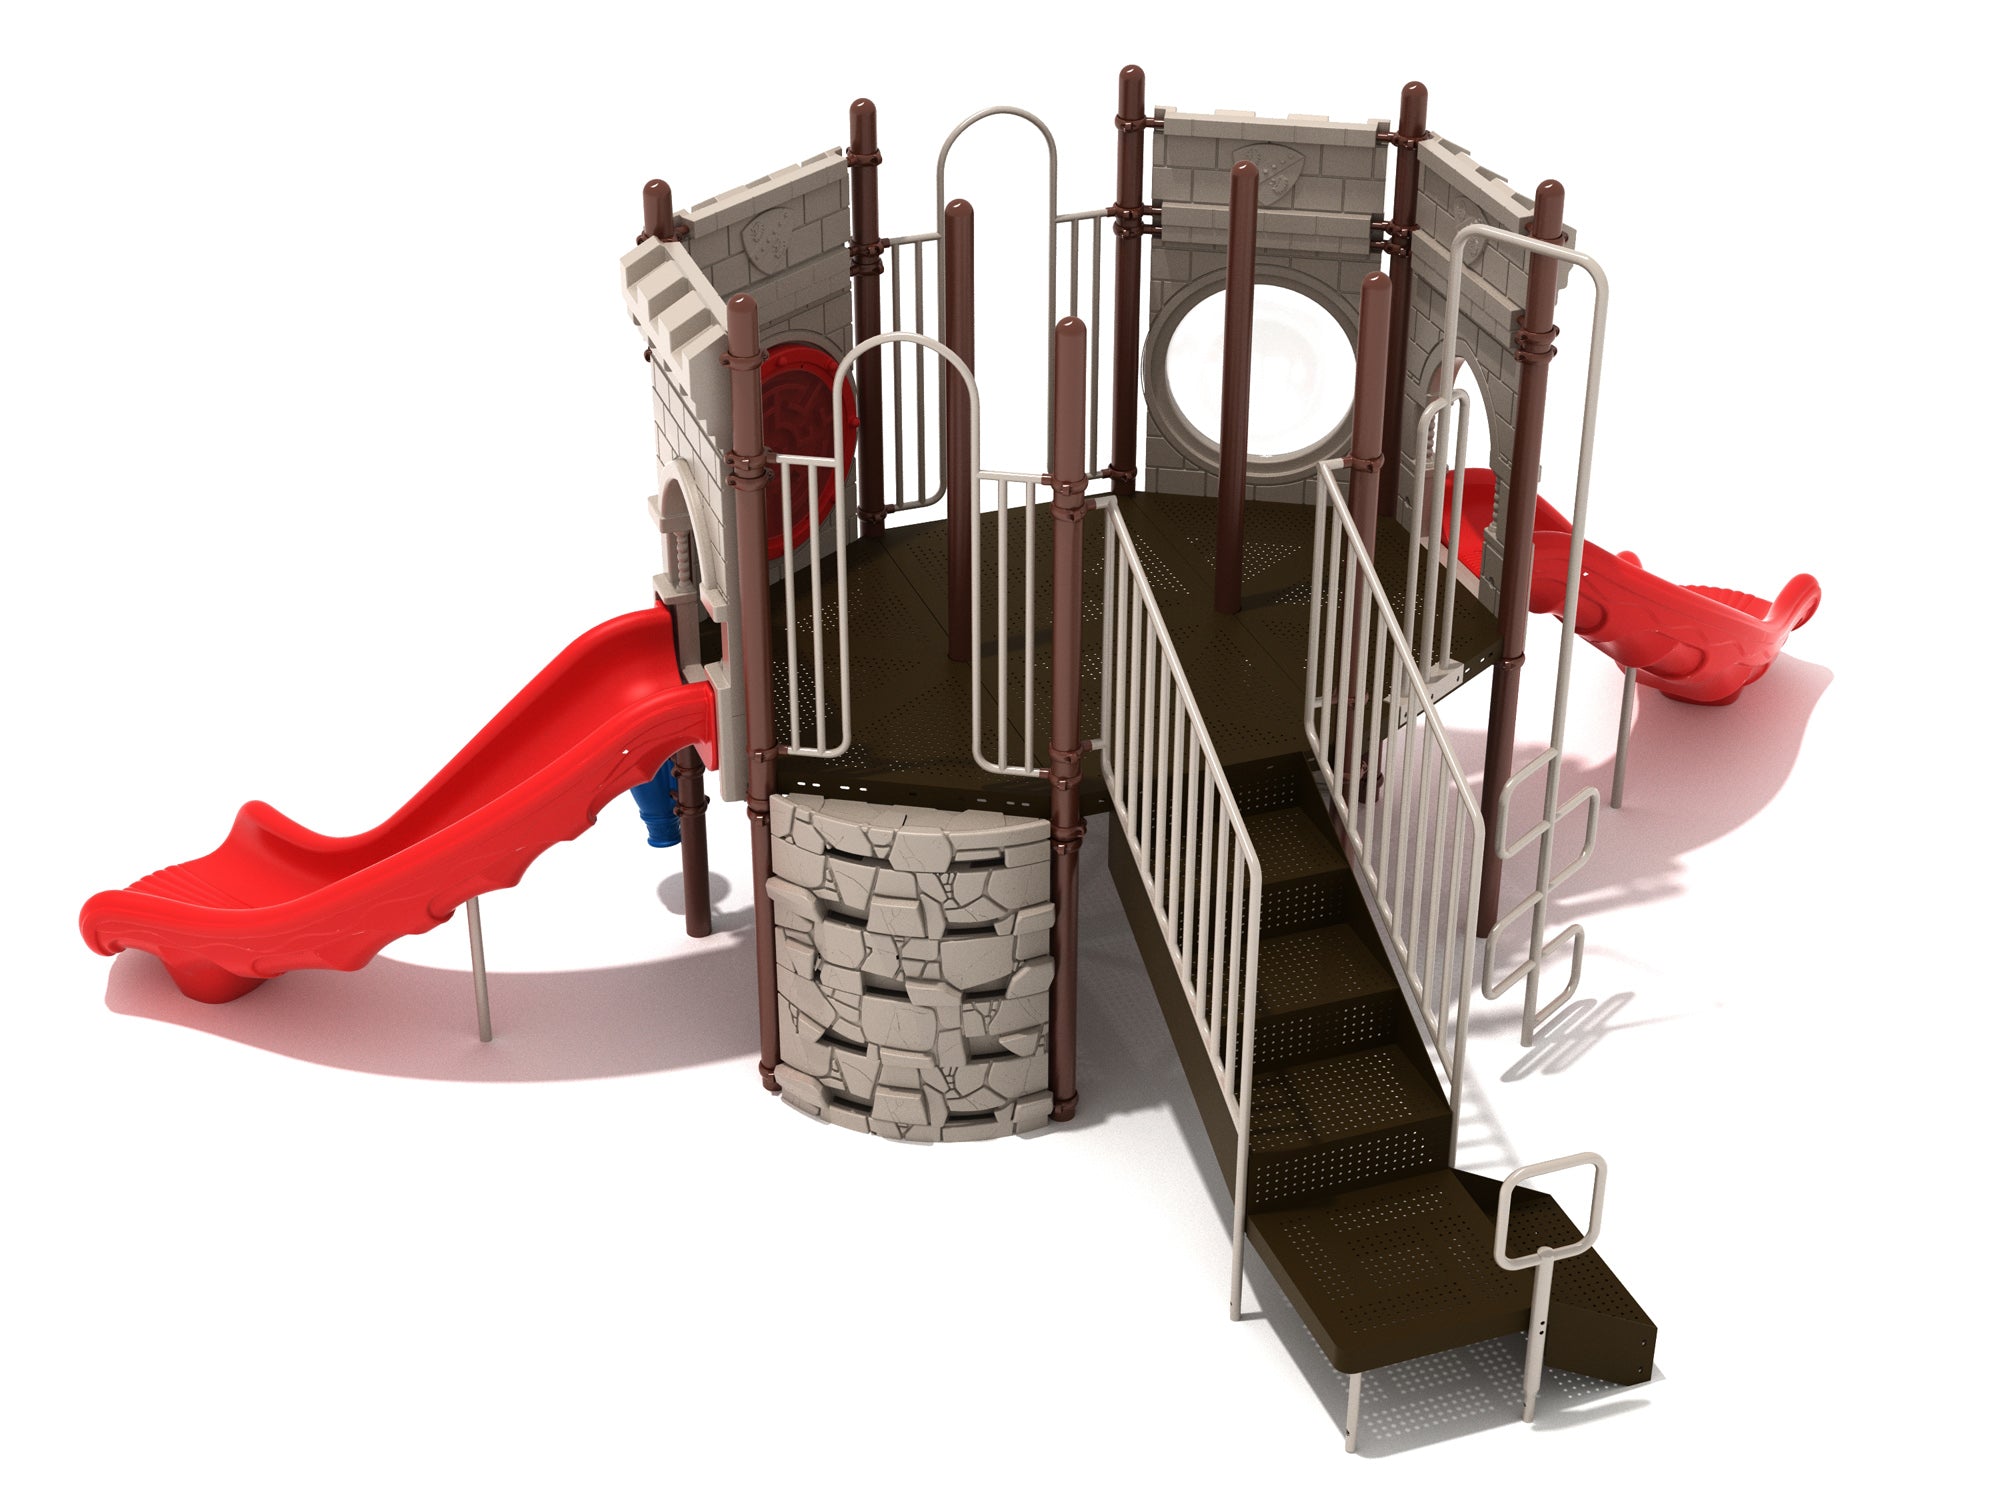  Analyzing image     Playground-Equipment-Commercial-Playgrounds-Belfry-Bridge-Front